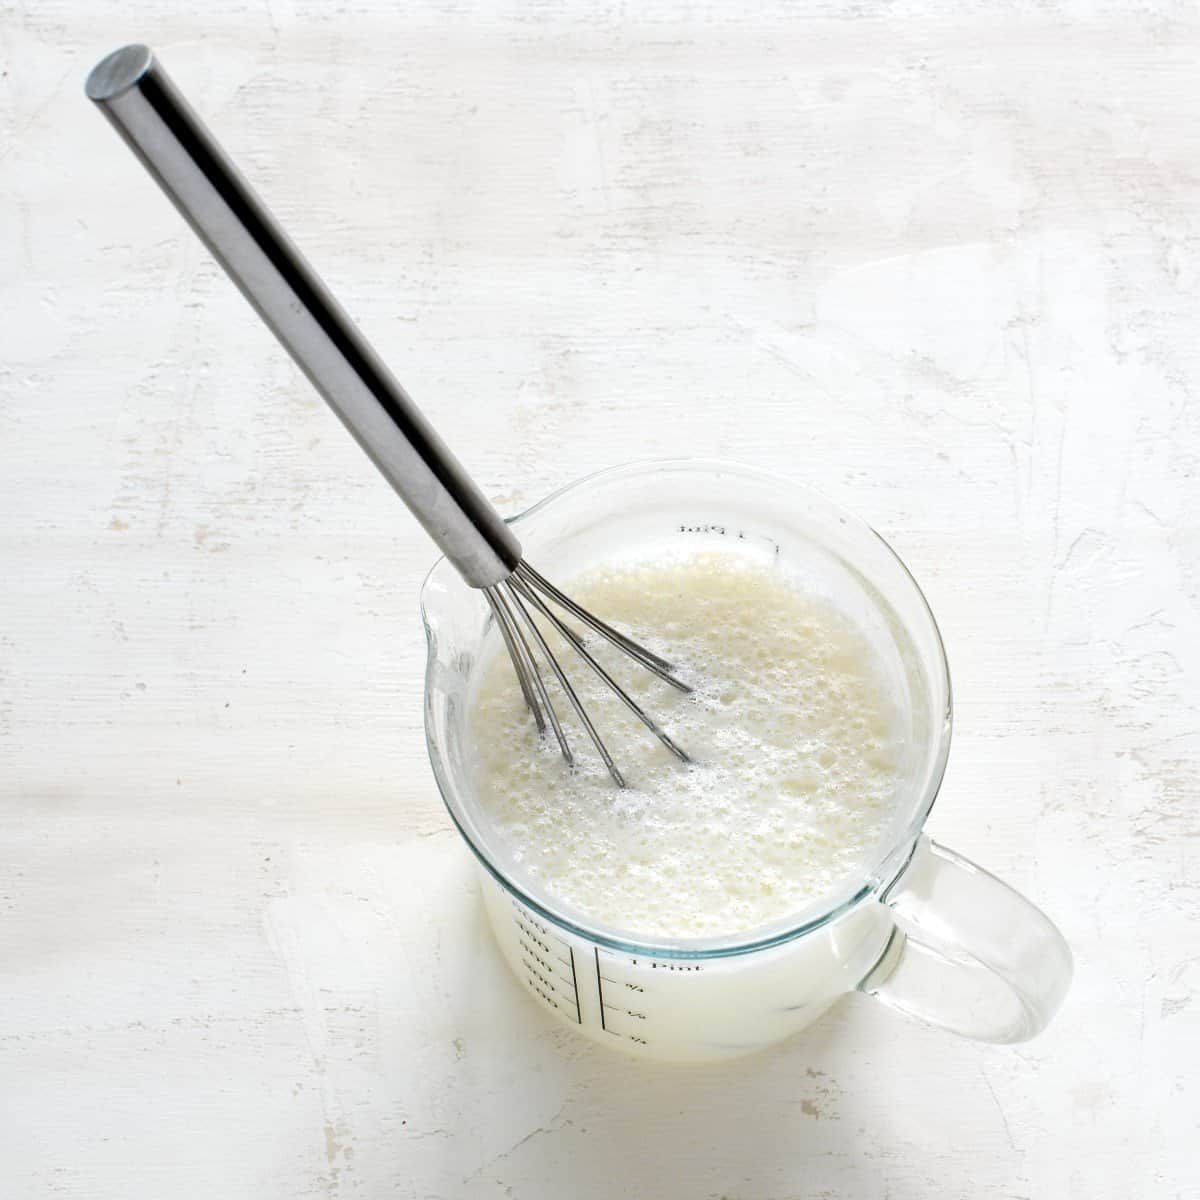 Flour whisked with milk in a glass.